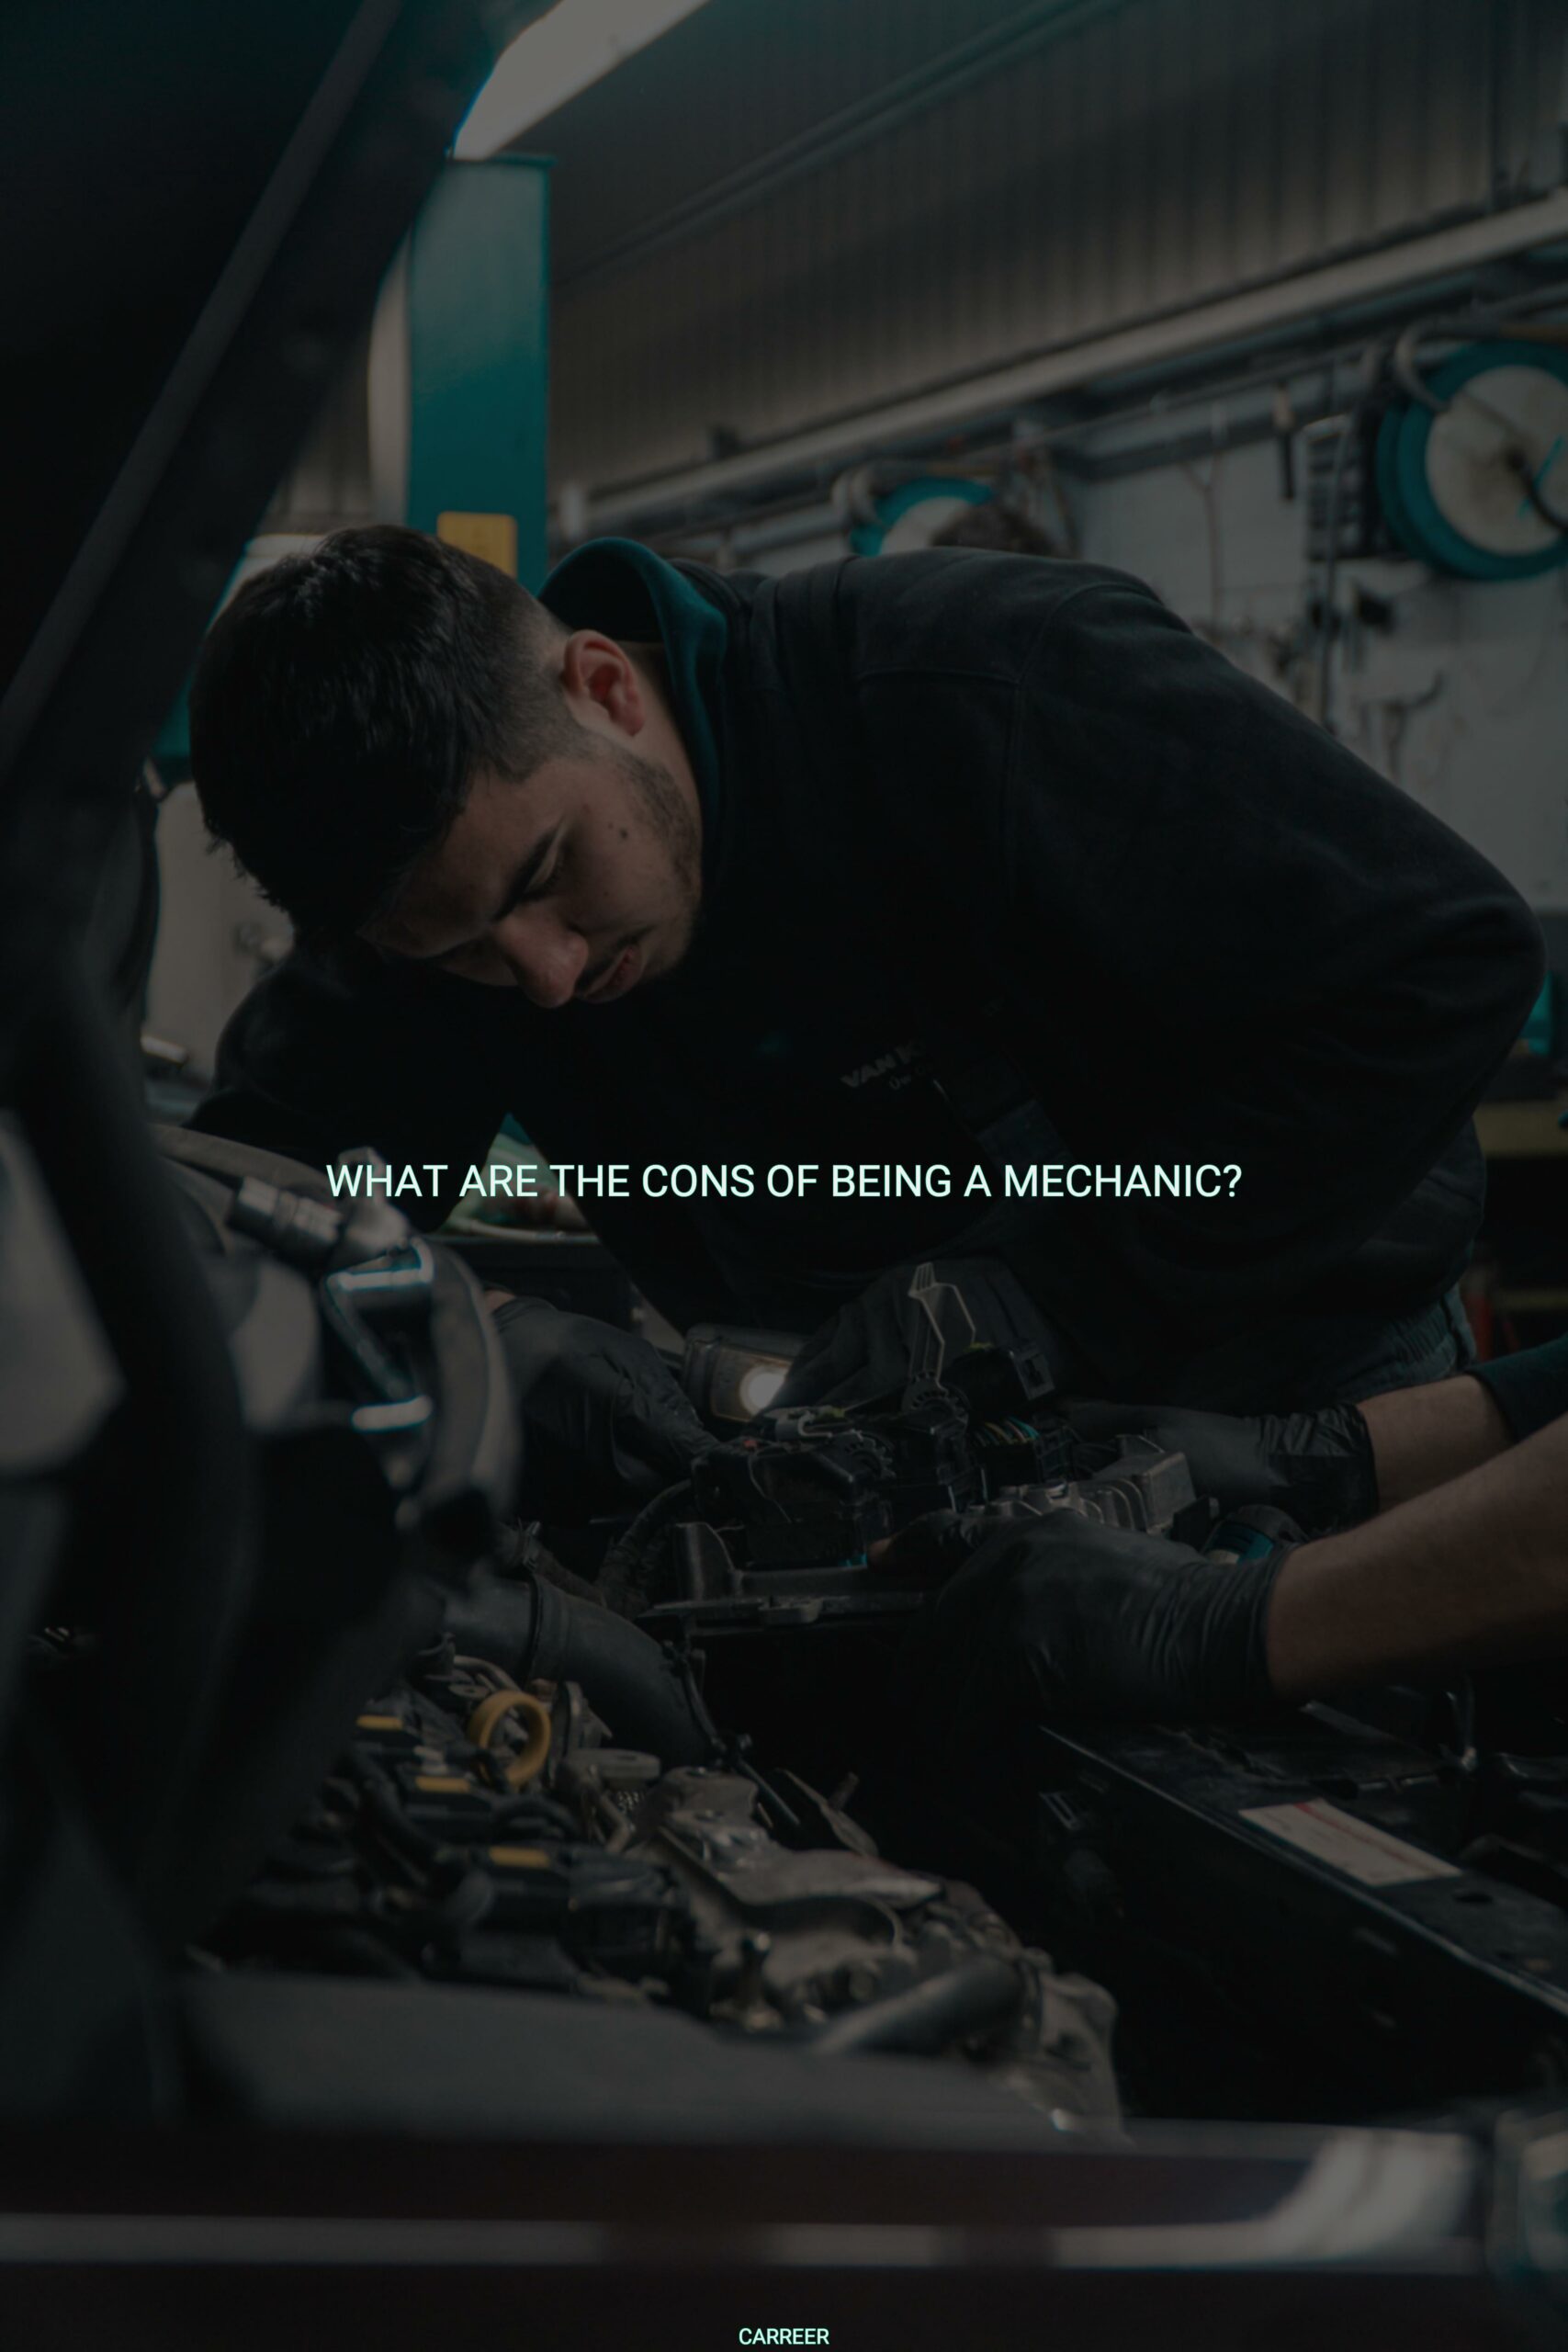 What are the cons of being a mechanic?